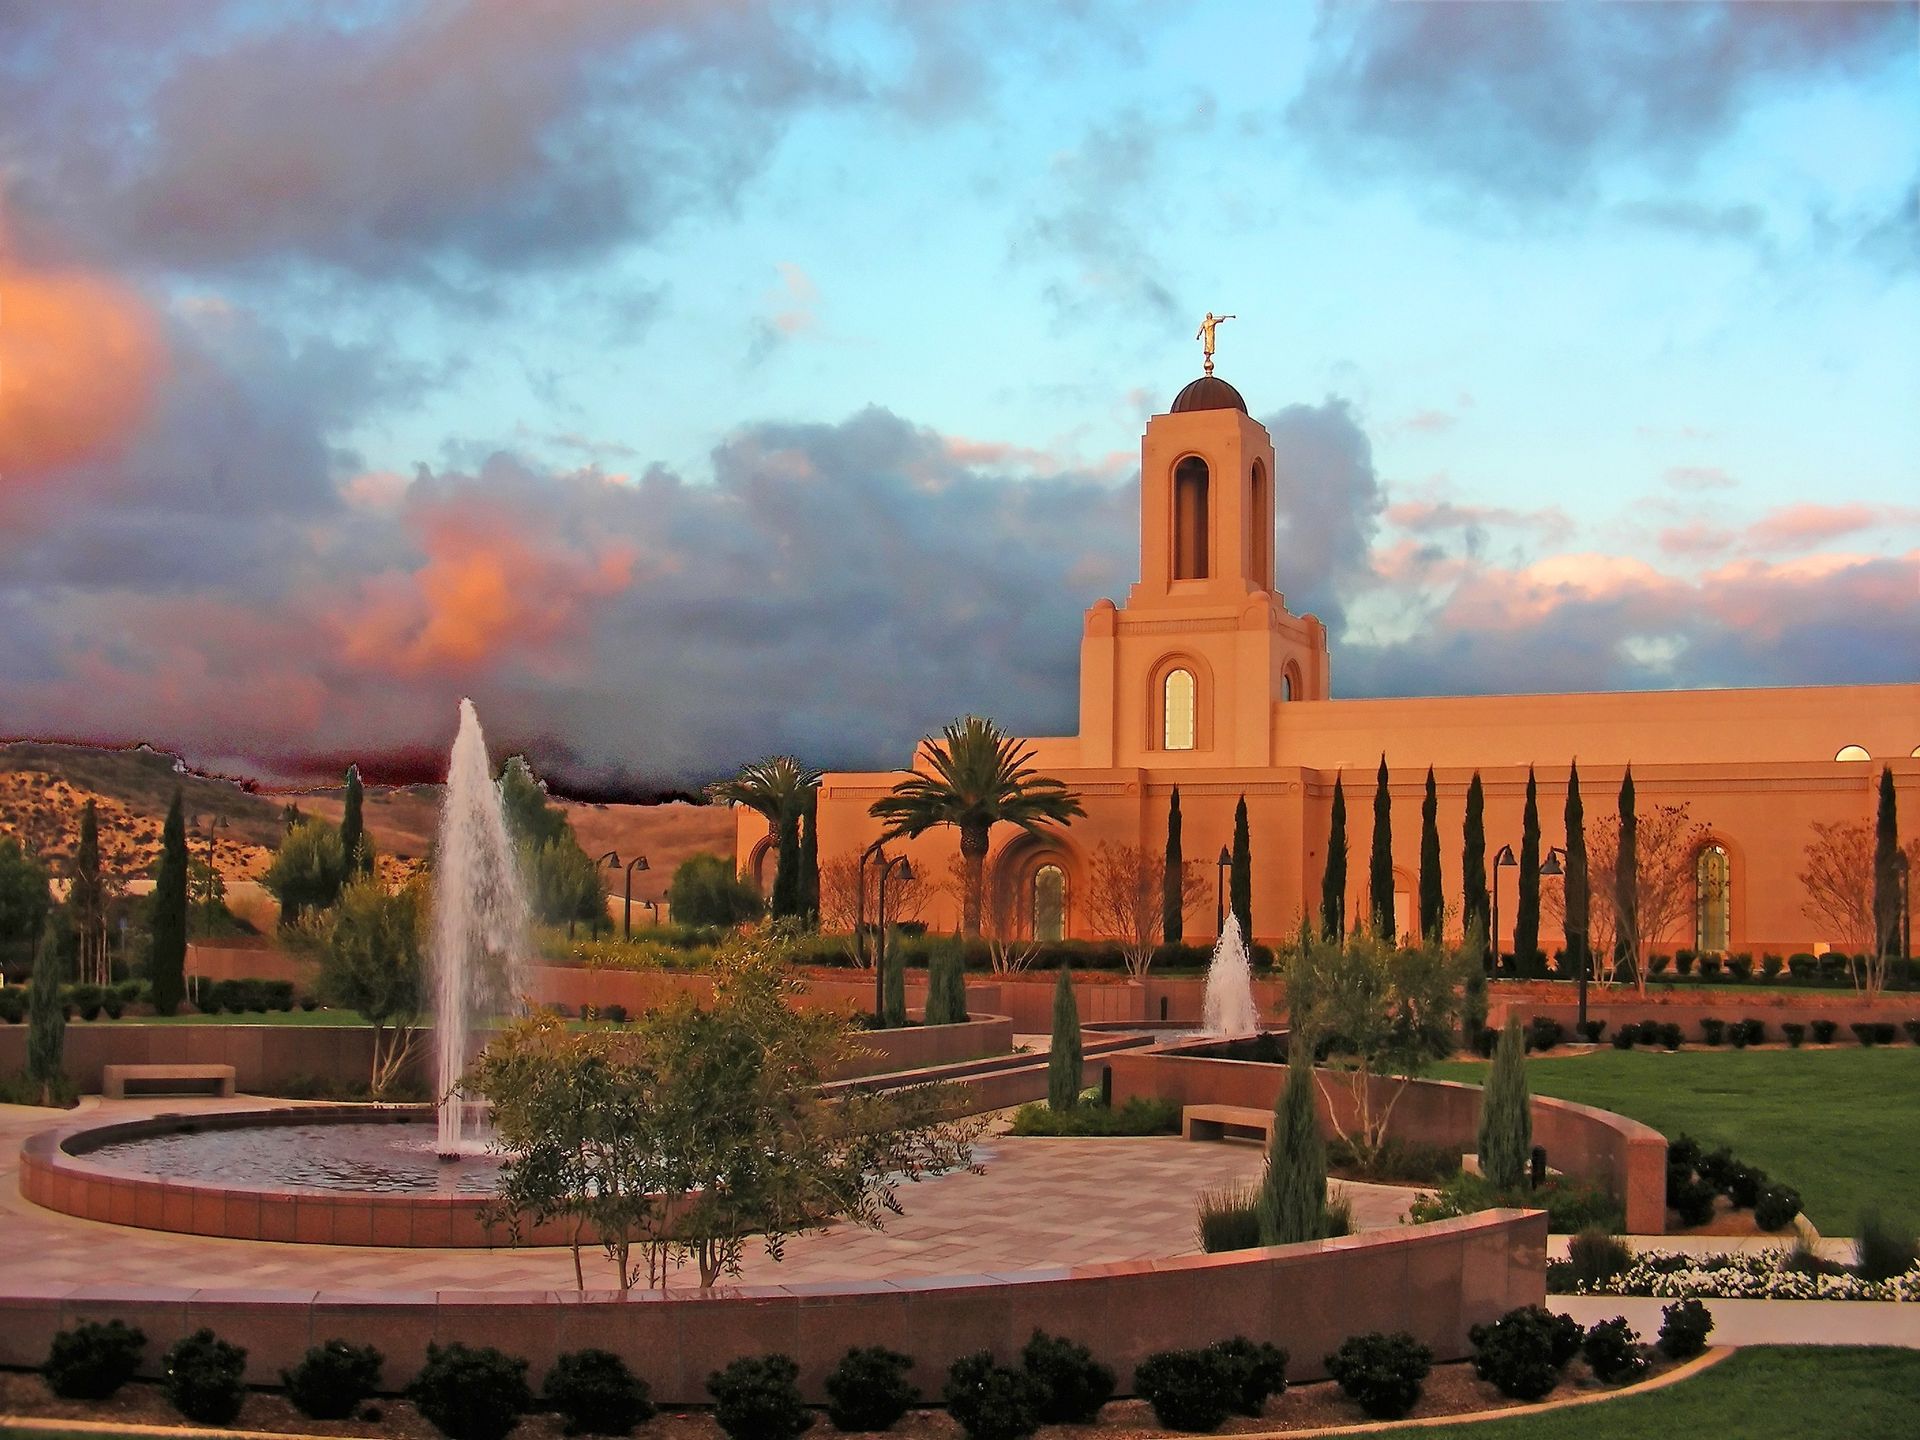 The Newport Beach California Temple at sunset, including fountains and scenery.